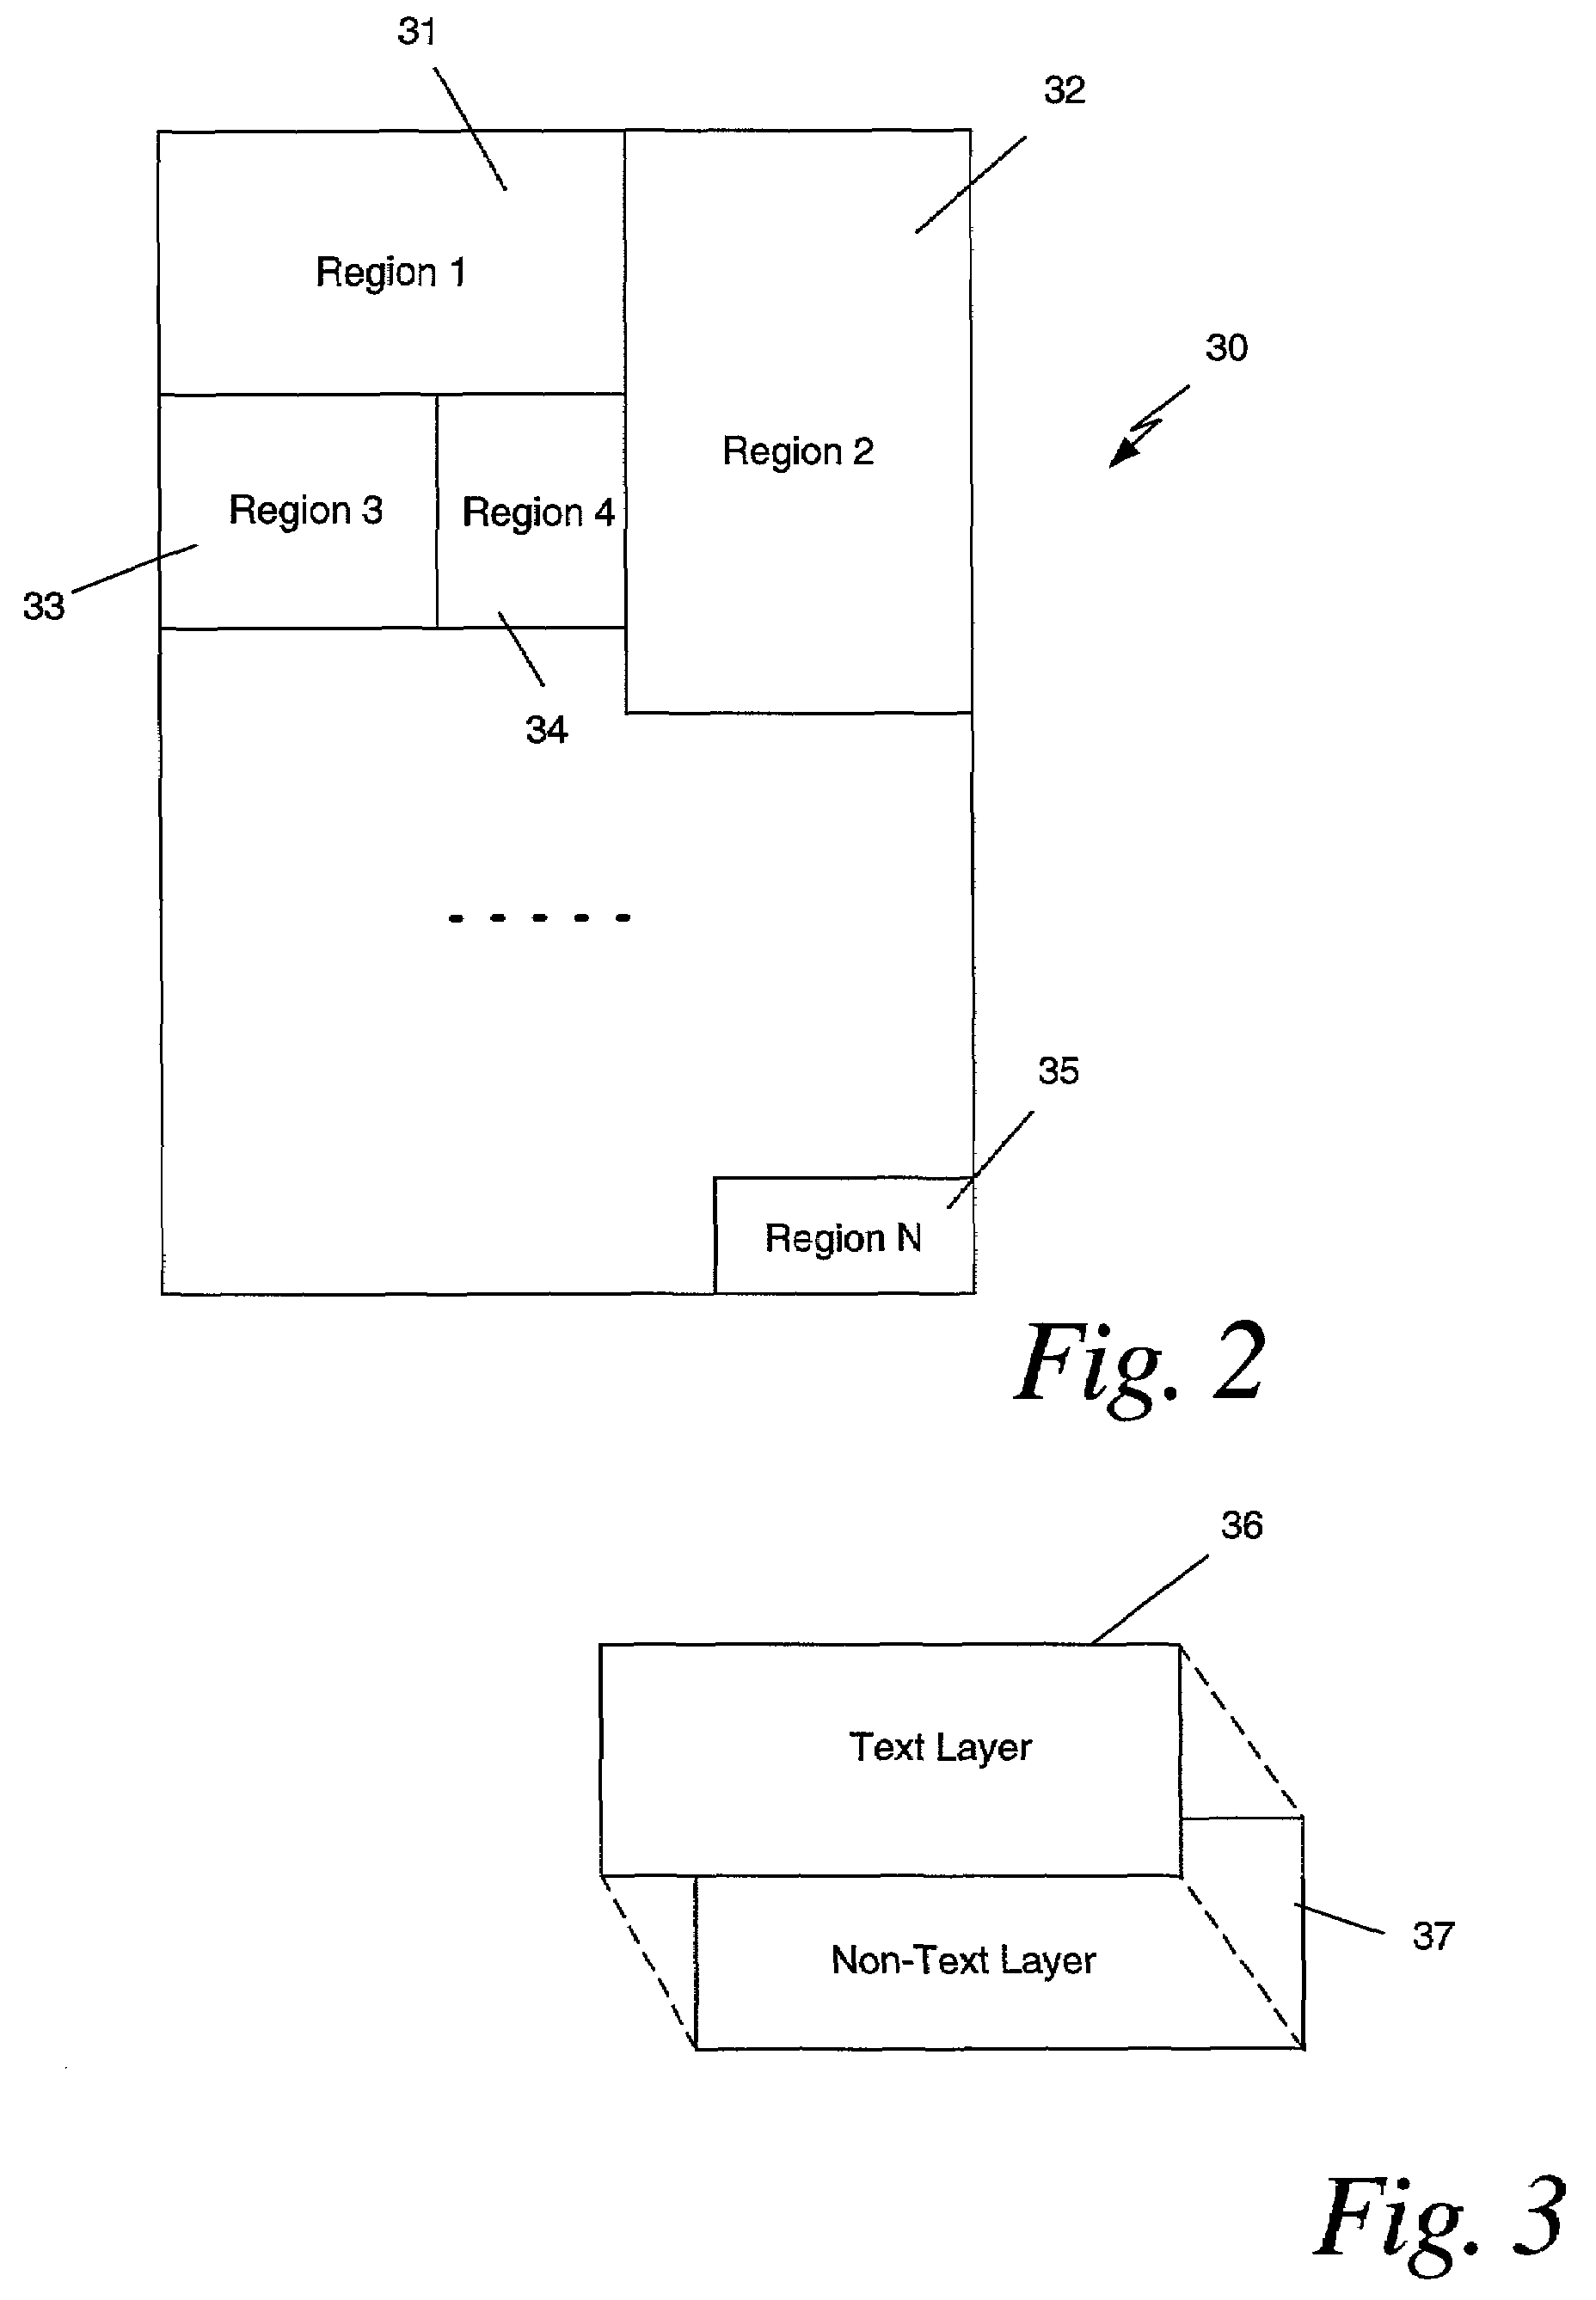 Compound document image compression using multi-region two layer format